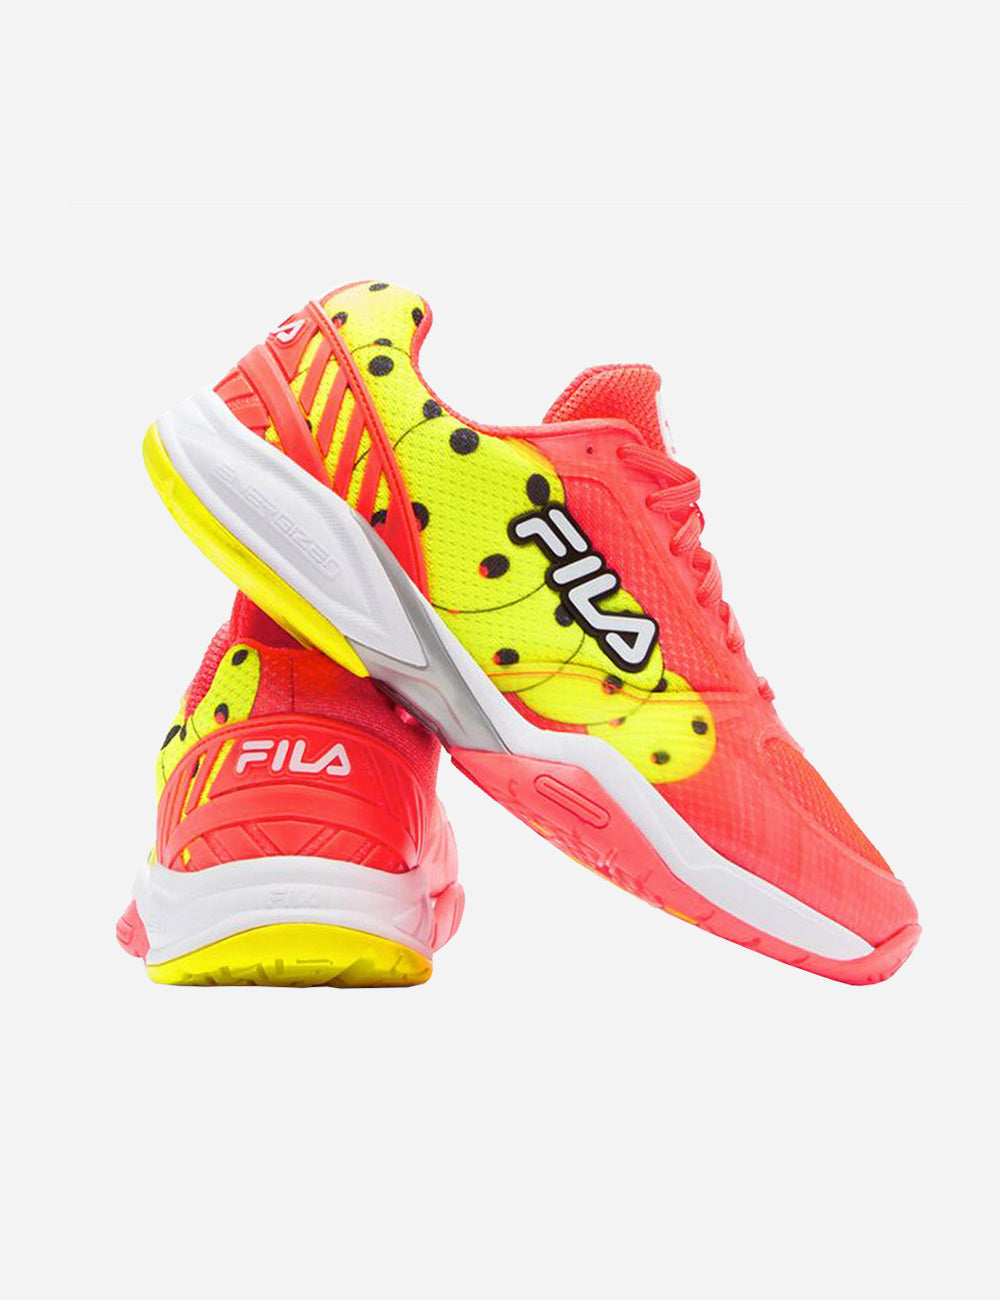 FILA Women's Volley Zone Pickleball Shoes - Coral